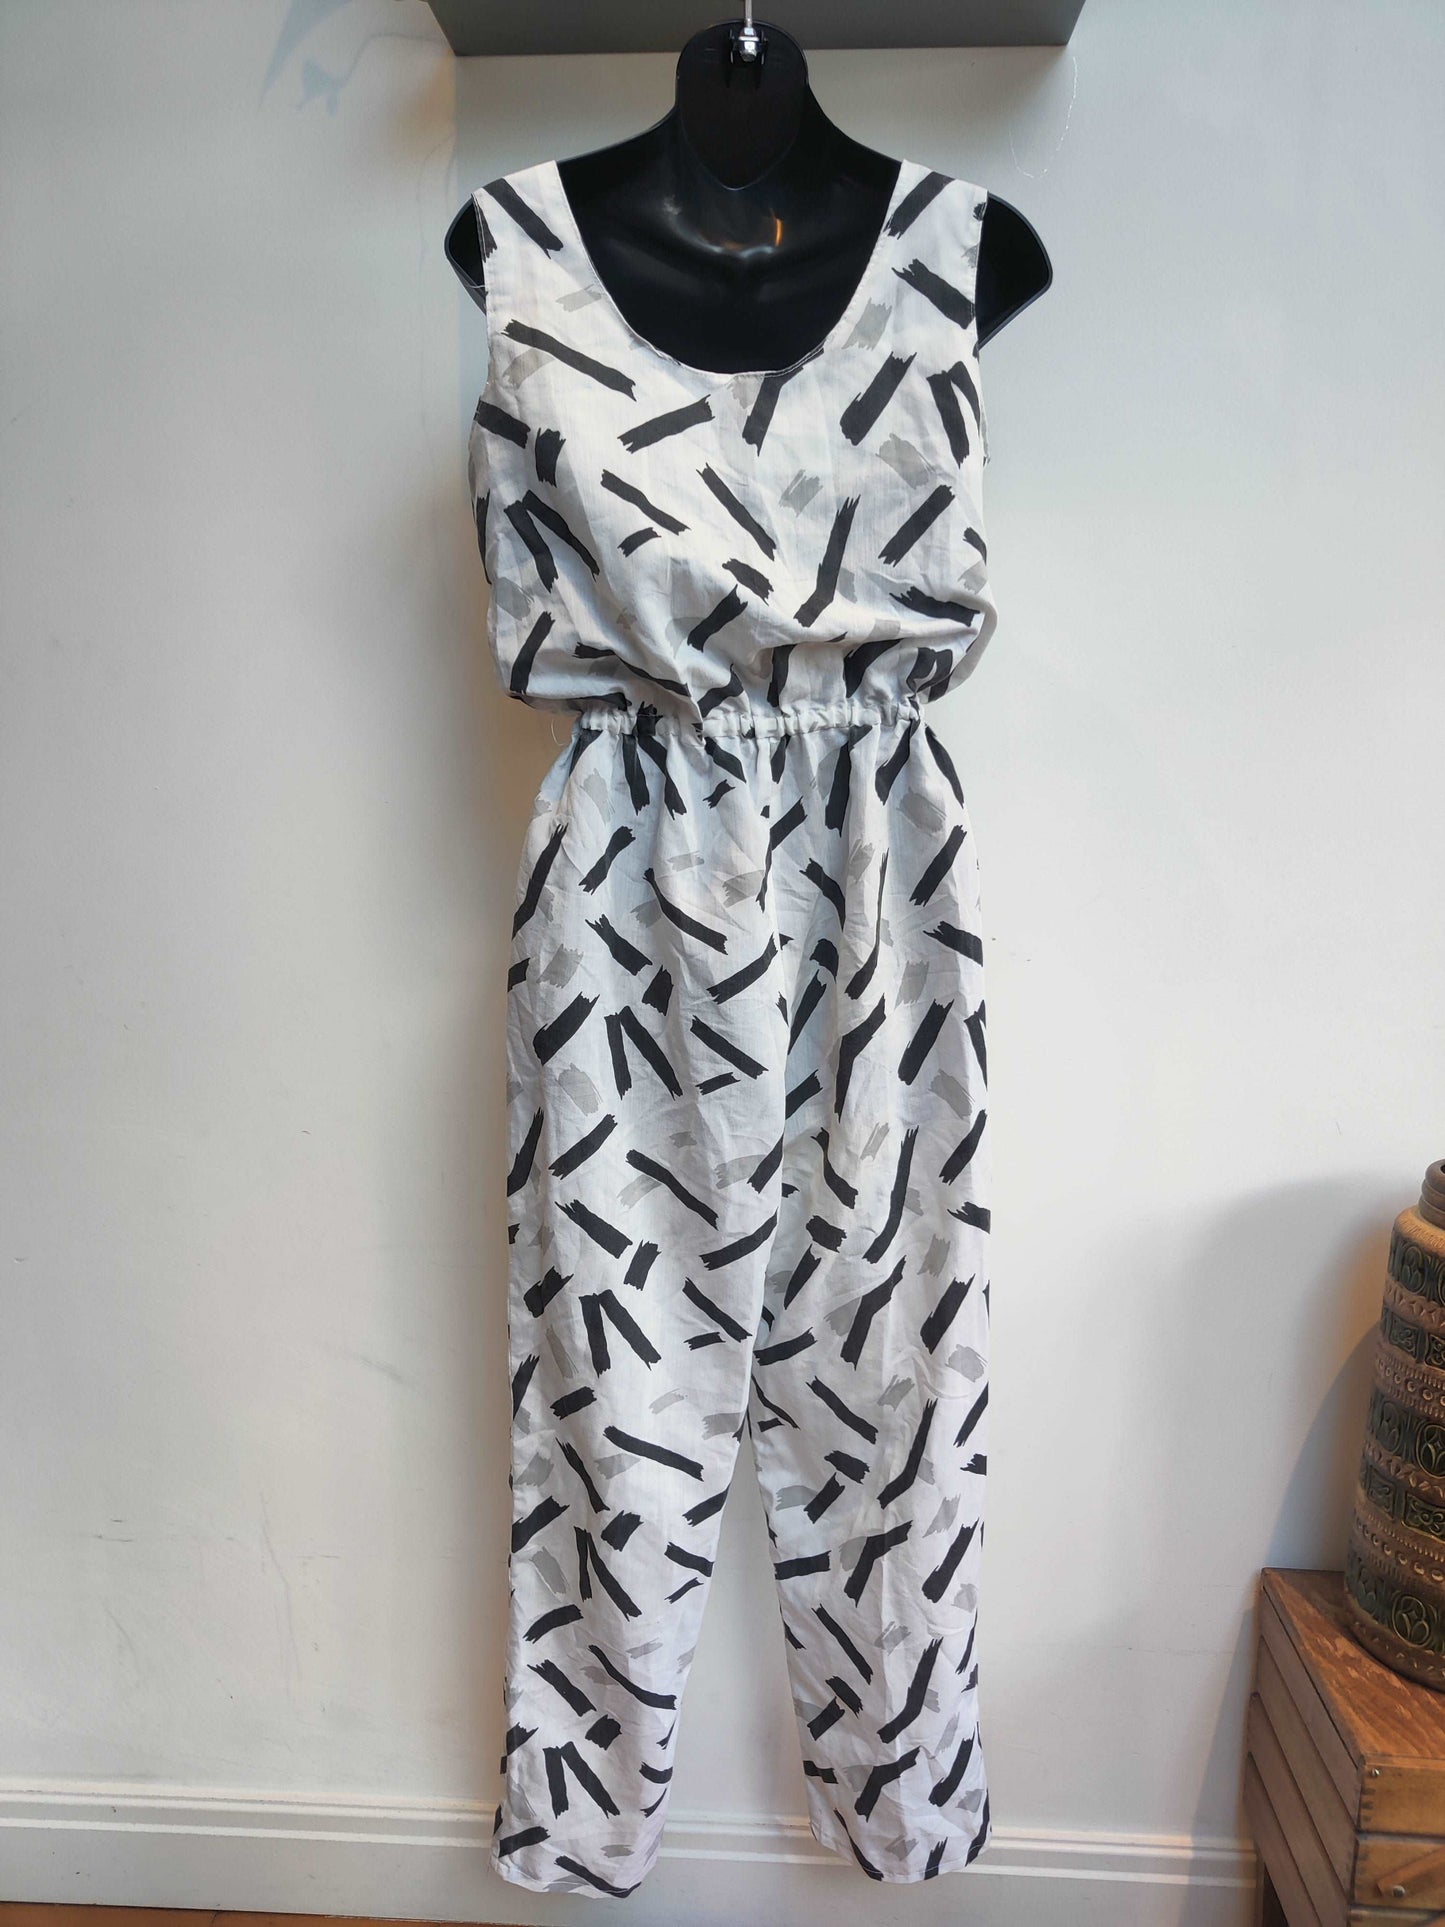 80s jumpsuit with black and white print. size 8-10